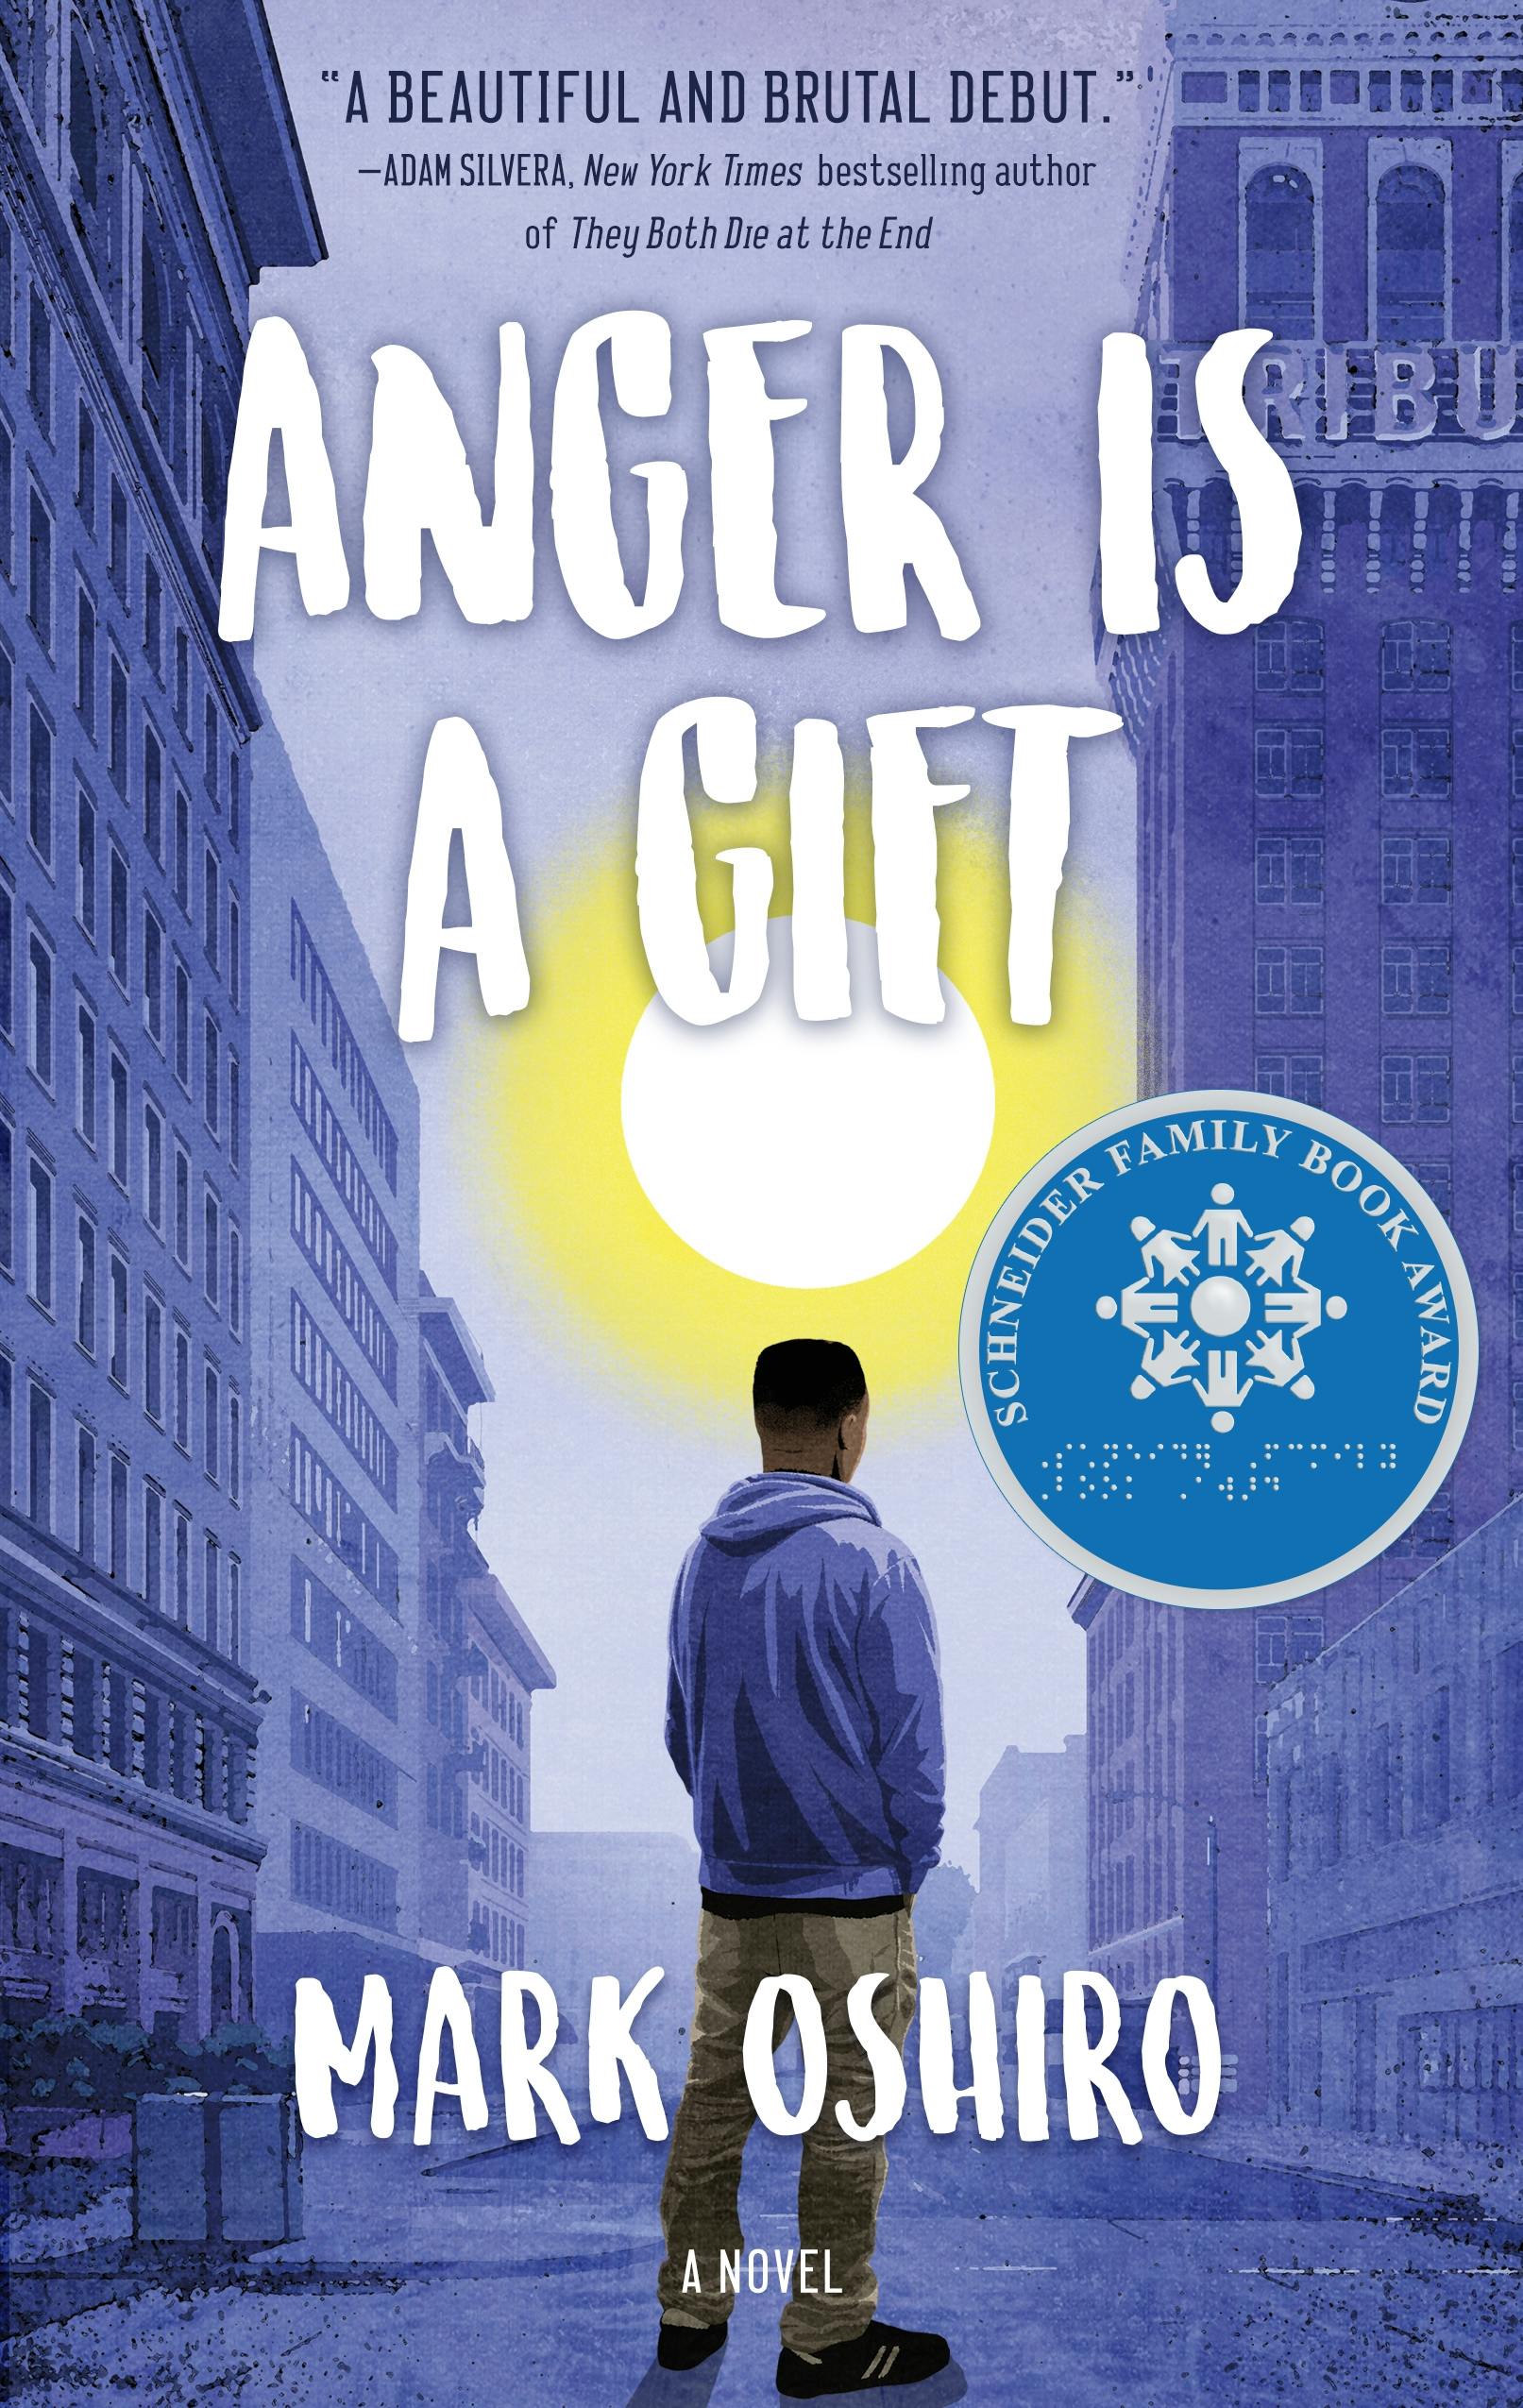 Cover for the book titled as: Anger Is a Gift